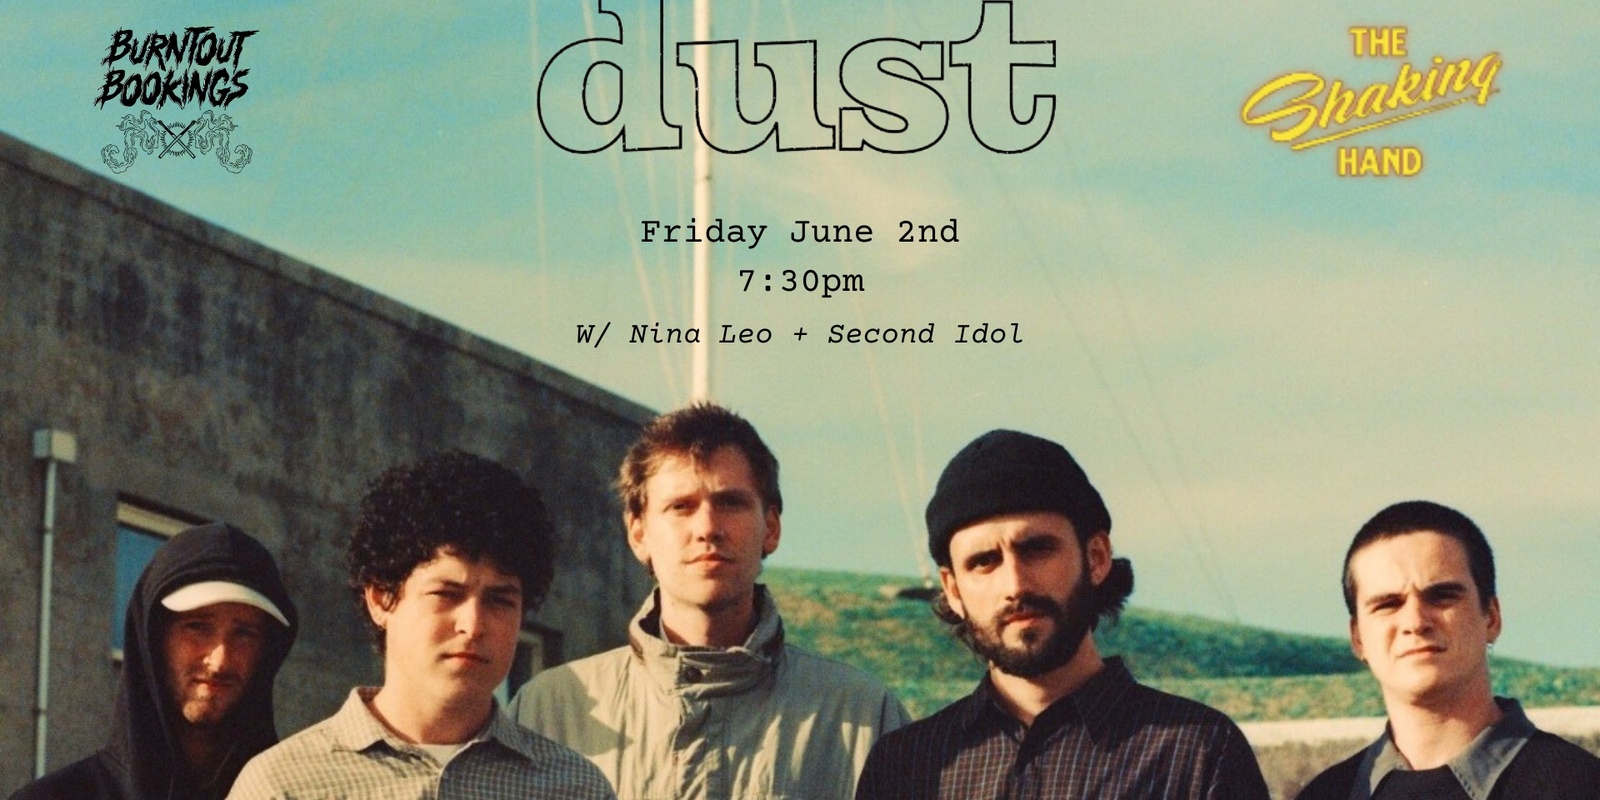 Banner image for Burntout Bookings presents Dust @ The Shaking Hand